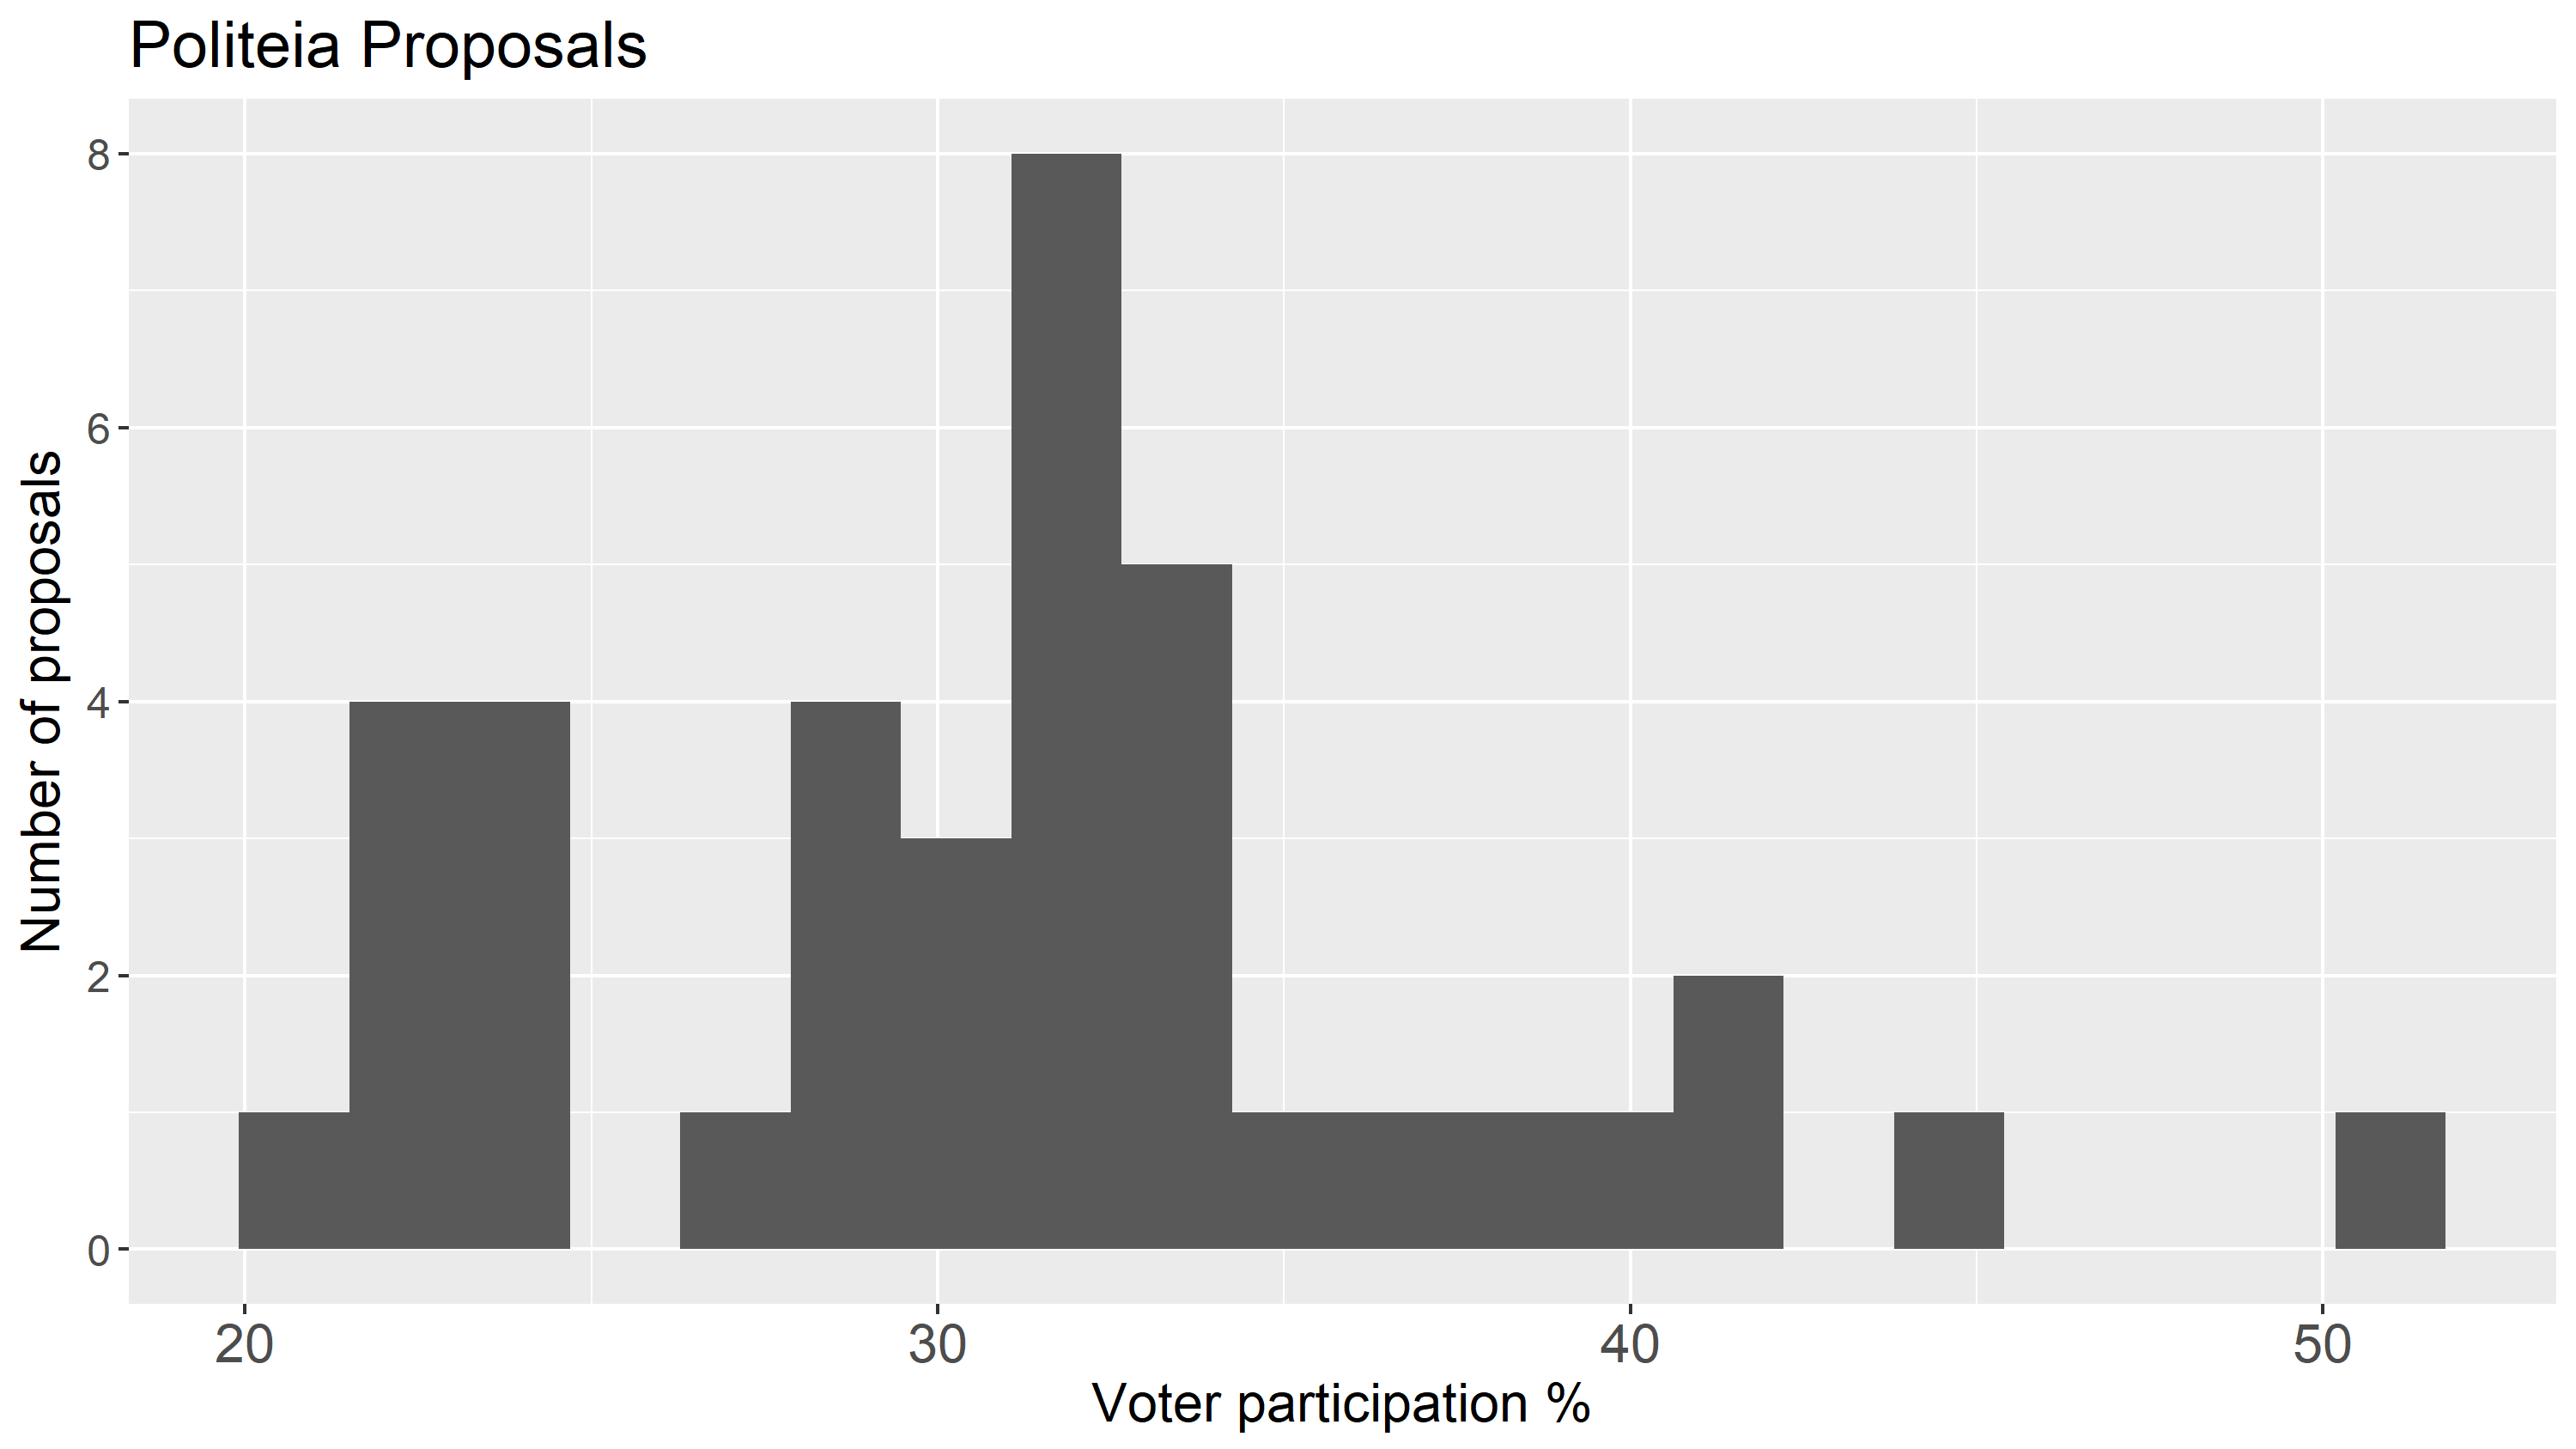 Participation rates in proposal votes